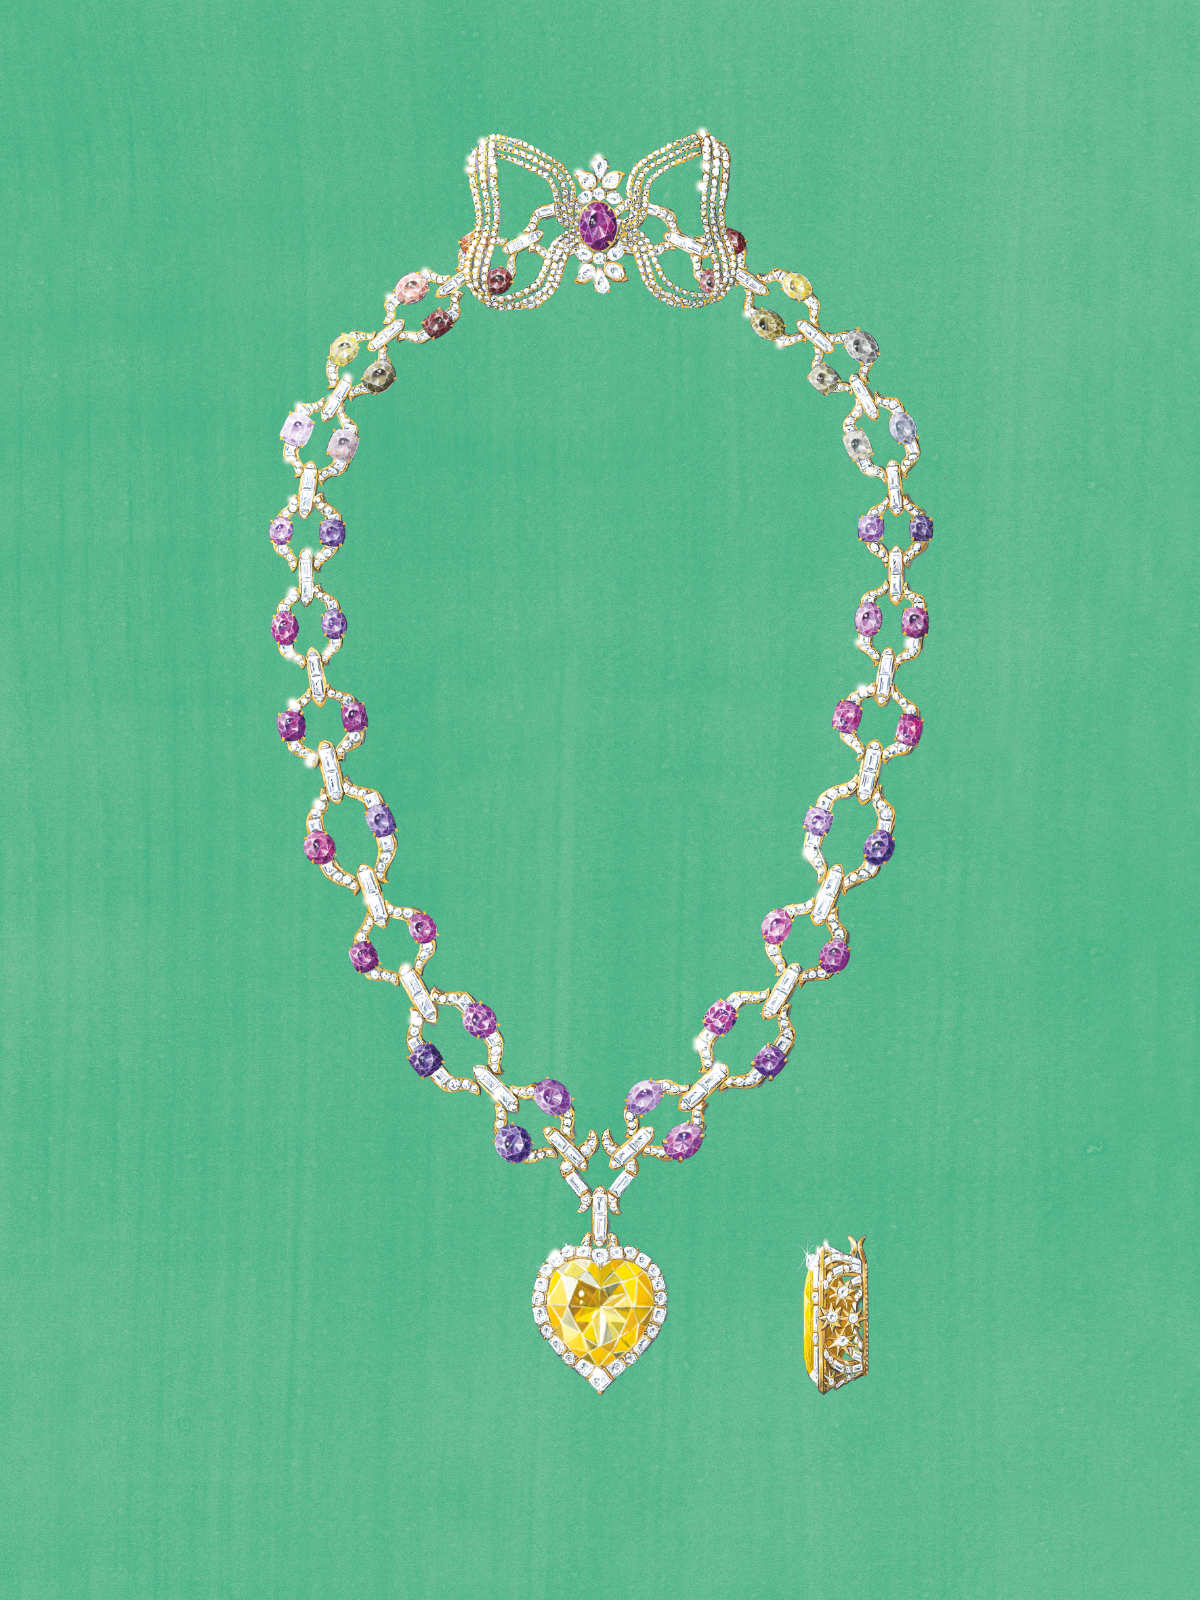 Introducing Gucci Allegoria: A Captivating High Jewelry Collection